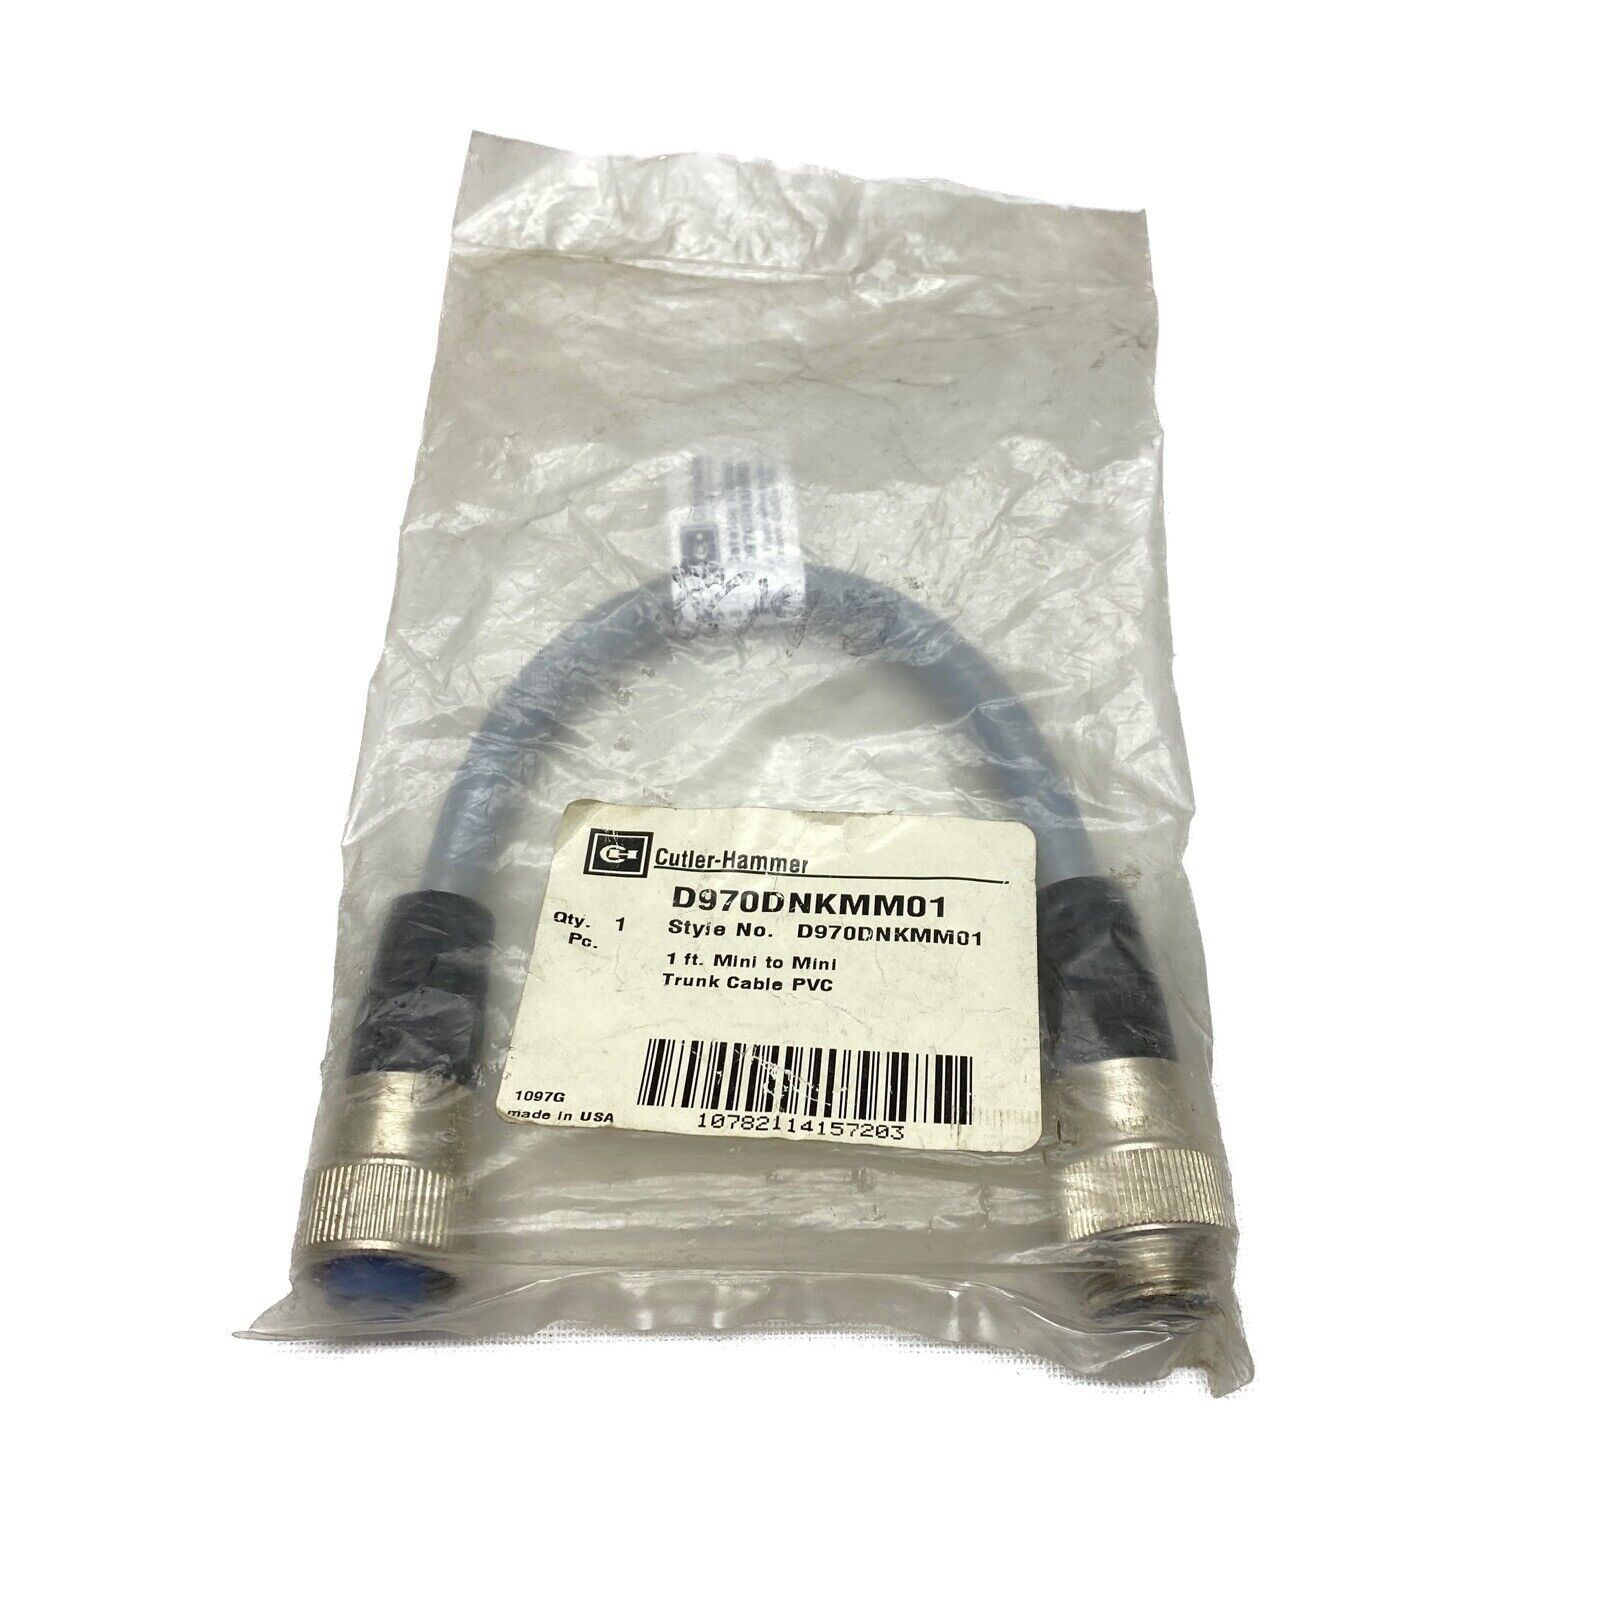 NEW IN PACKAGE Cutler-Hammer 1’ Mini to Mini PVC Trunk Cable D970DNKMM01